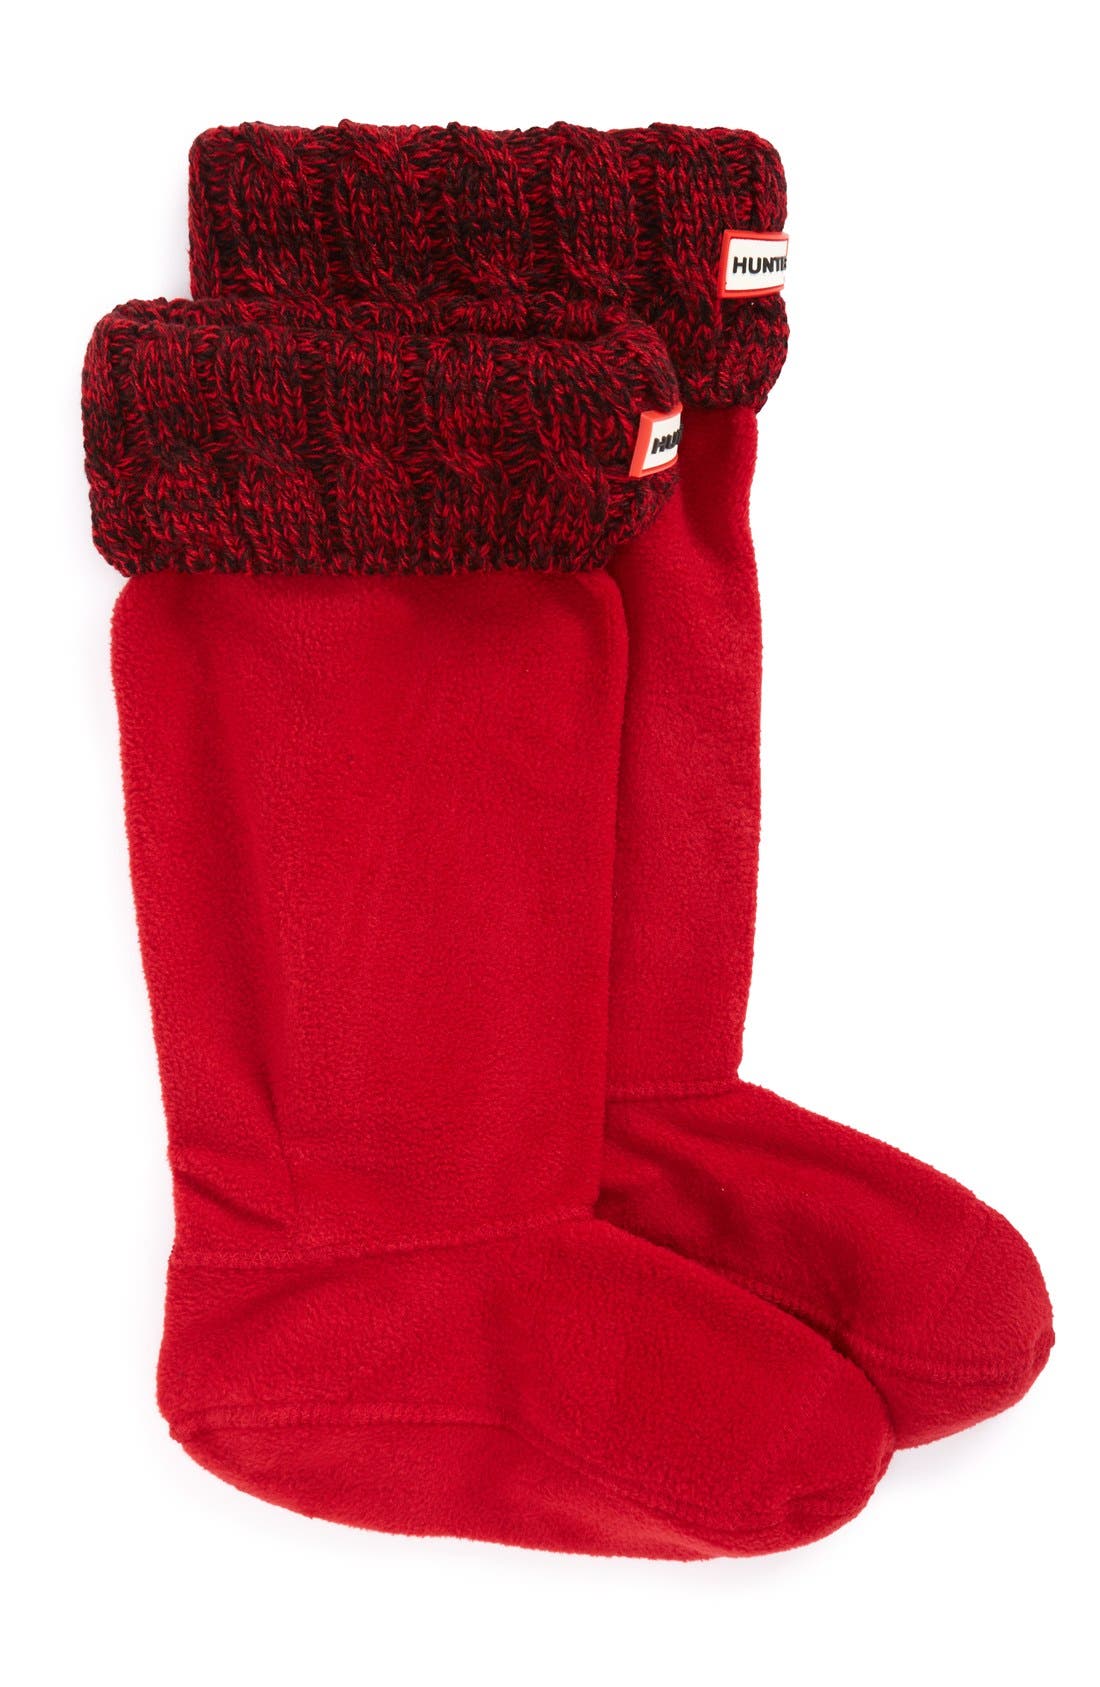 original tall cable knit cuff welly boot socks